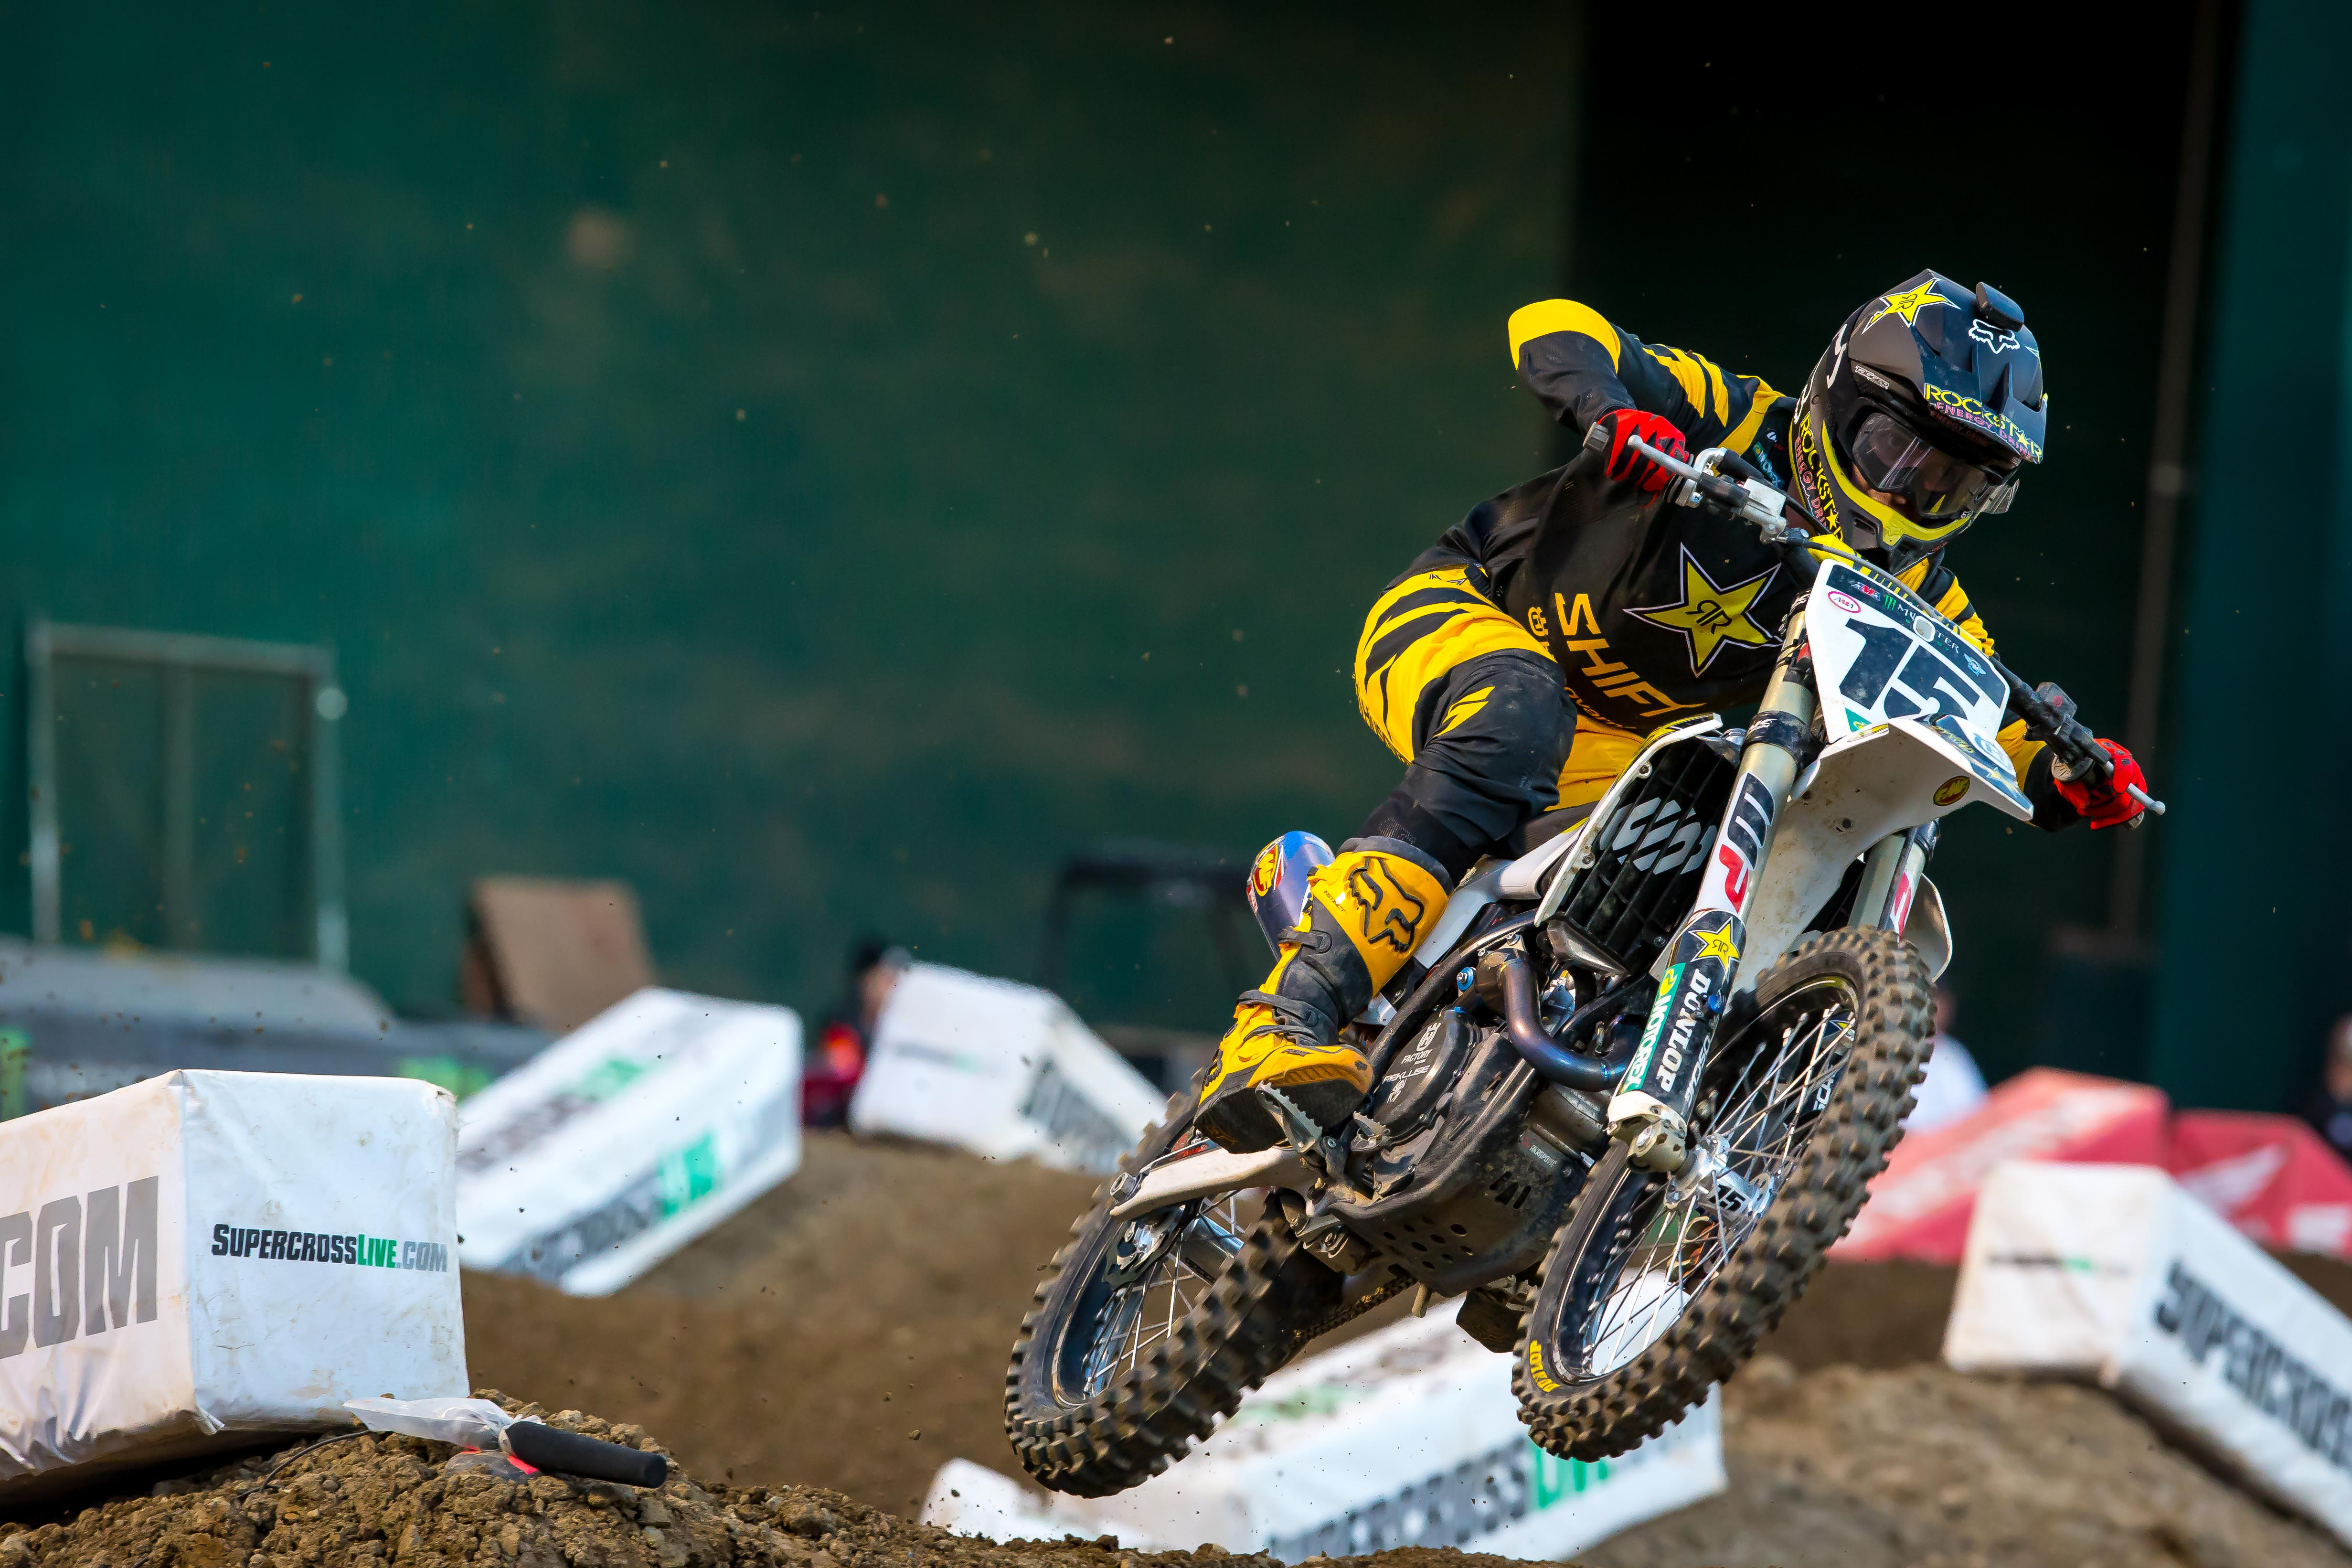 Dean Wilson finished 11th in the 450 class. (Photo: Simon Cudby)